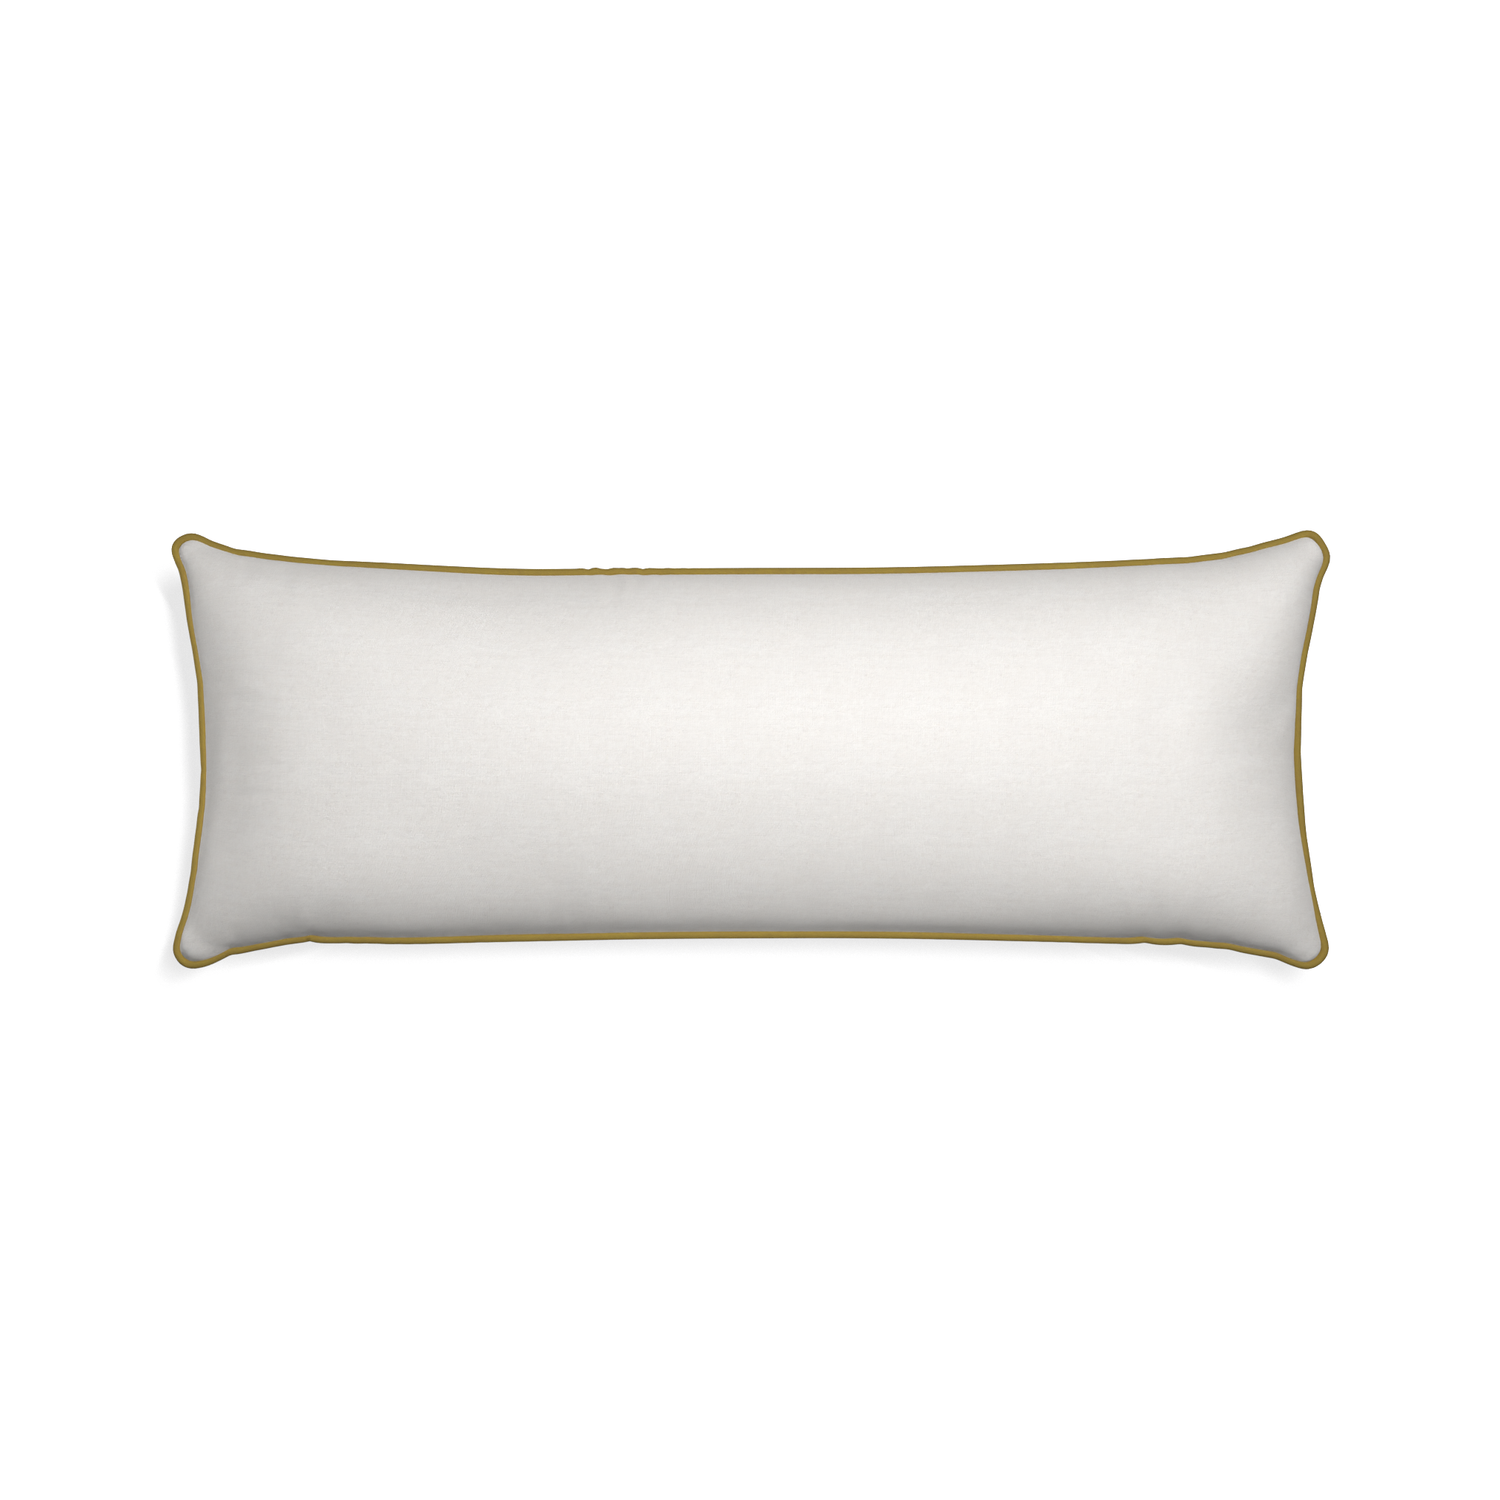 Xl-lumbar flour custom natural whitepillow with c piping on white background